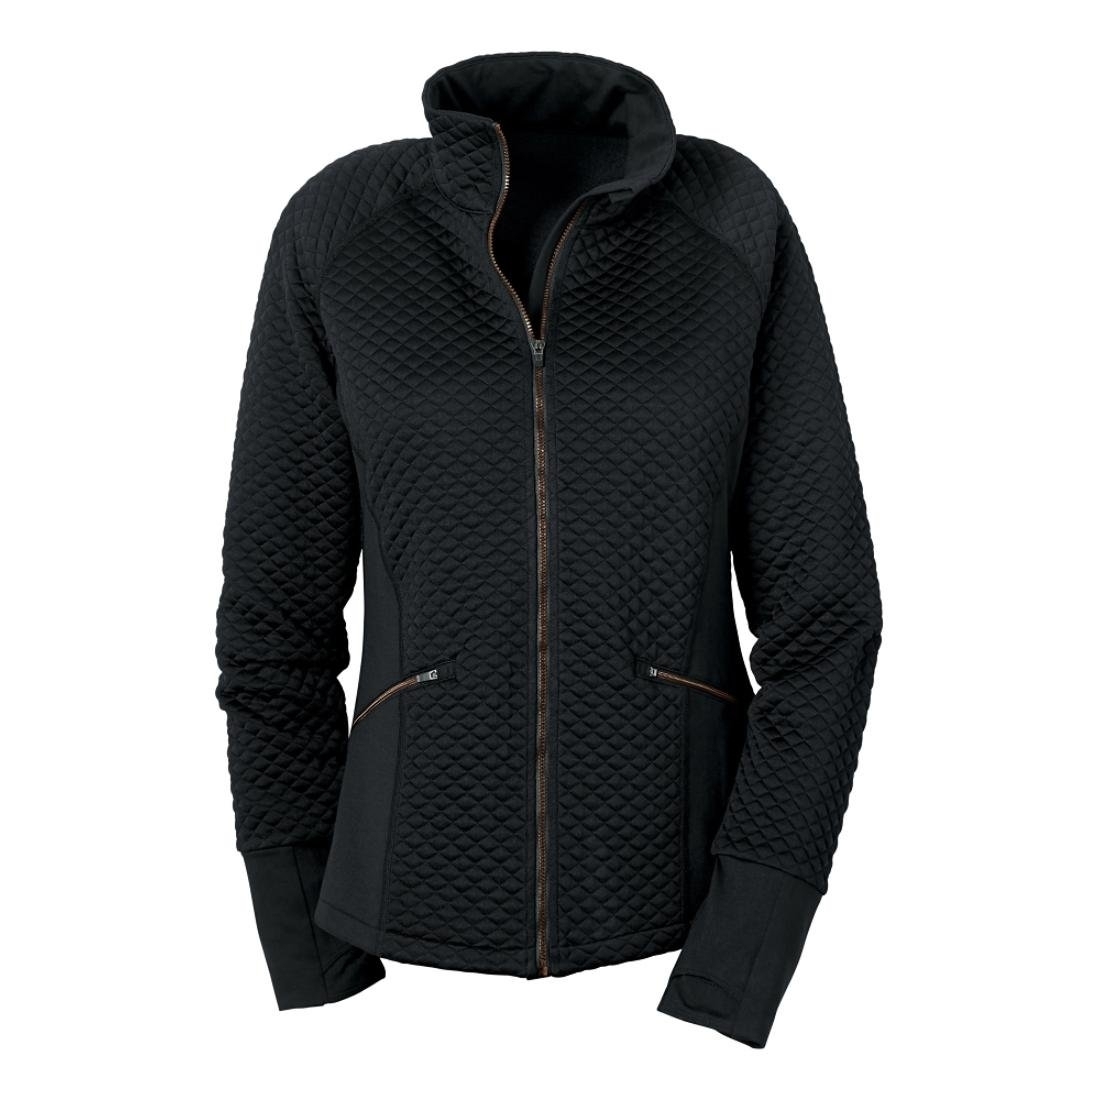 R-Gear Womens Smooth Transition Quilted Jacket BLACK-BLACK-WHITE - 10